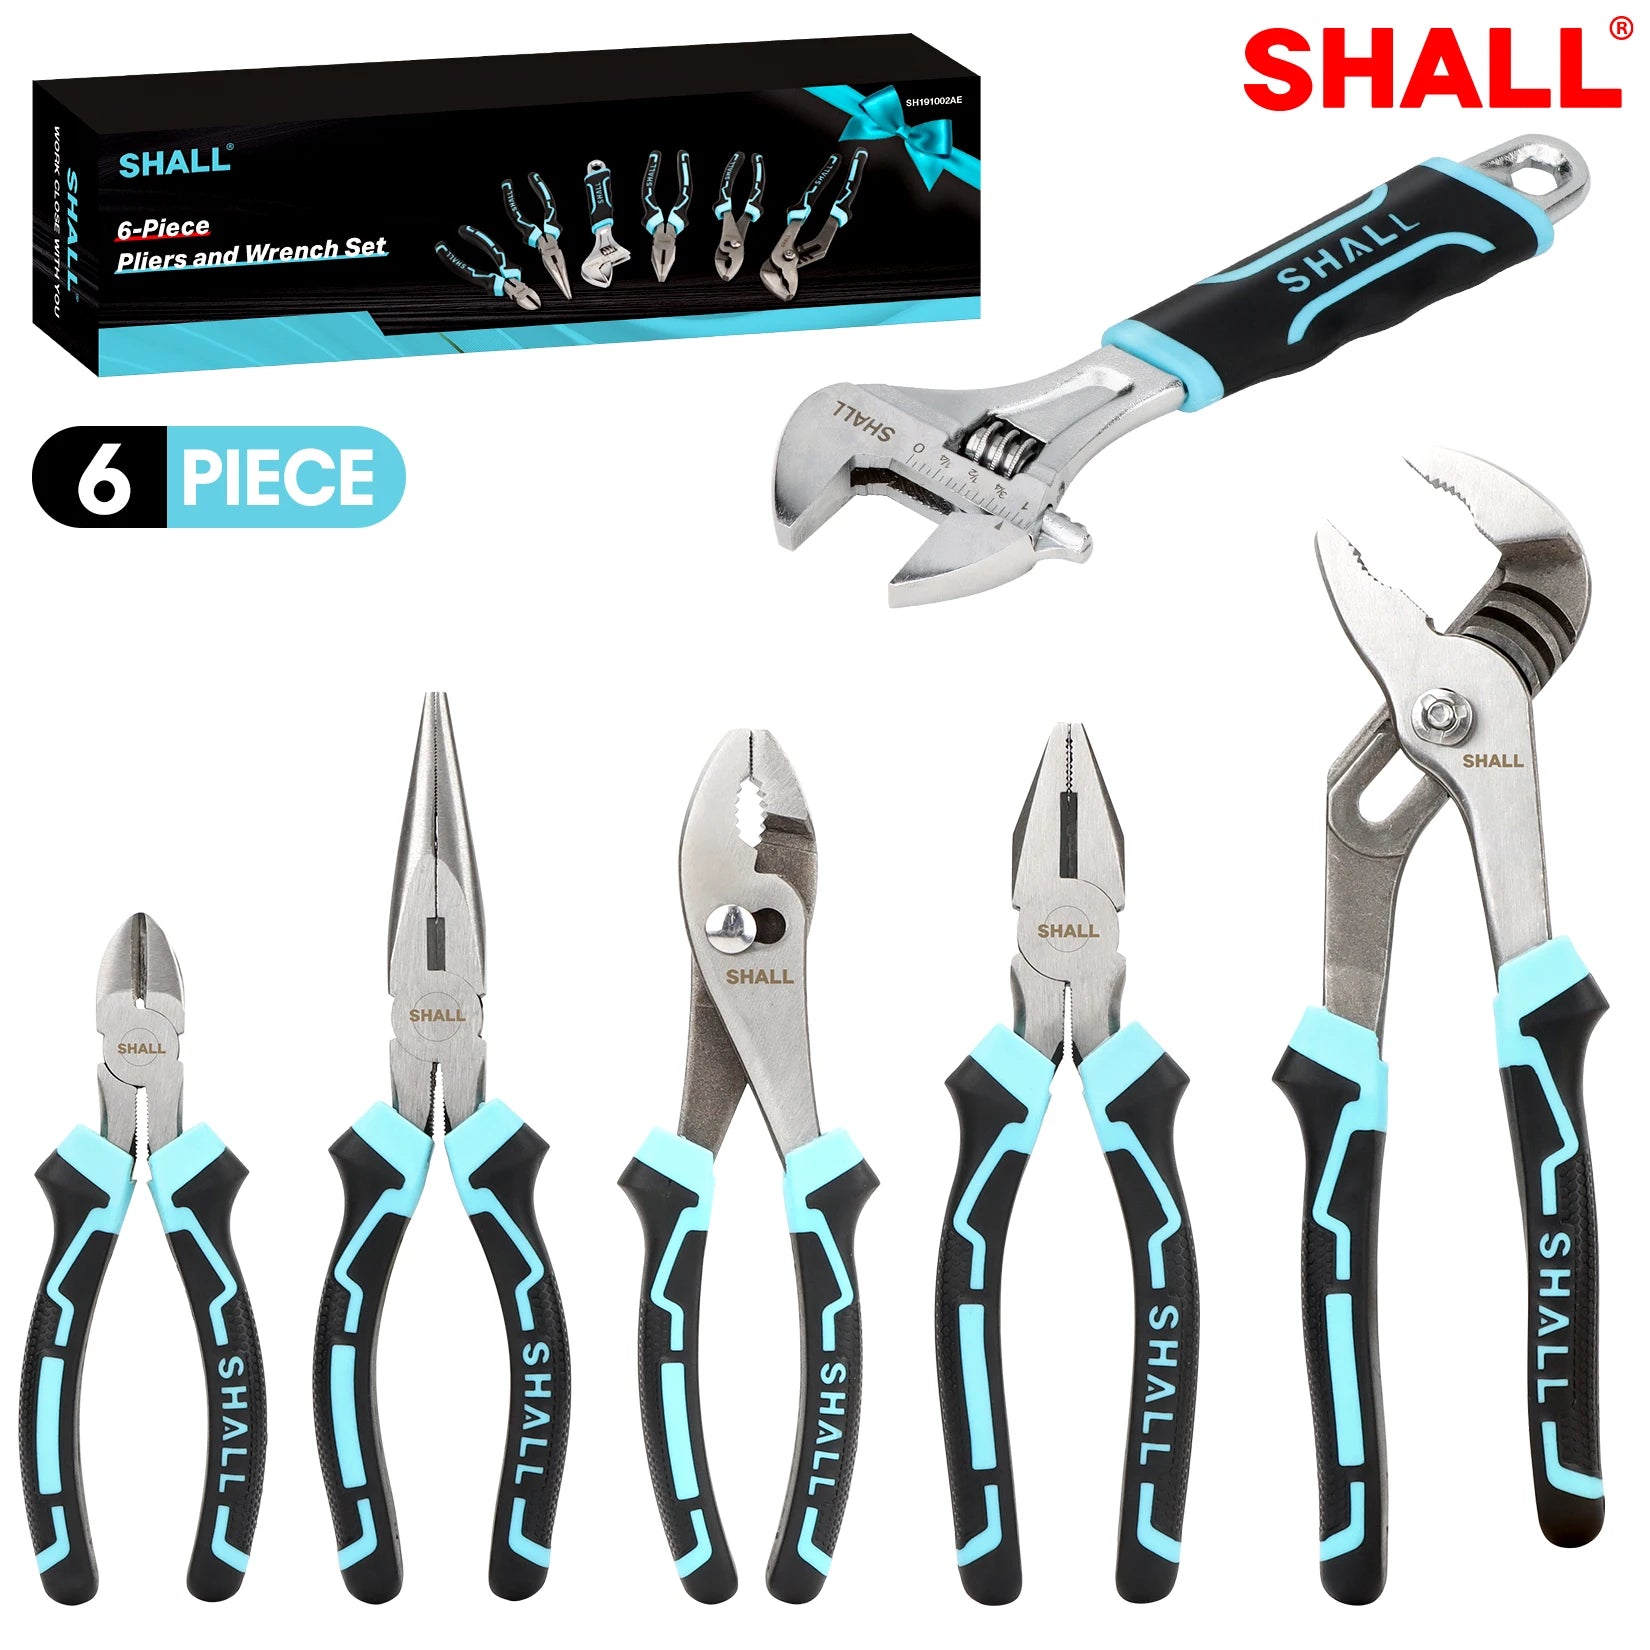 SHALL Pliers Tool Set 6-Piece Diagonal Cutting/Long Nose/Linesman /Slip-Joint/Groove-Joint Pliers Set with Adjustable Wrench